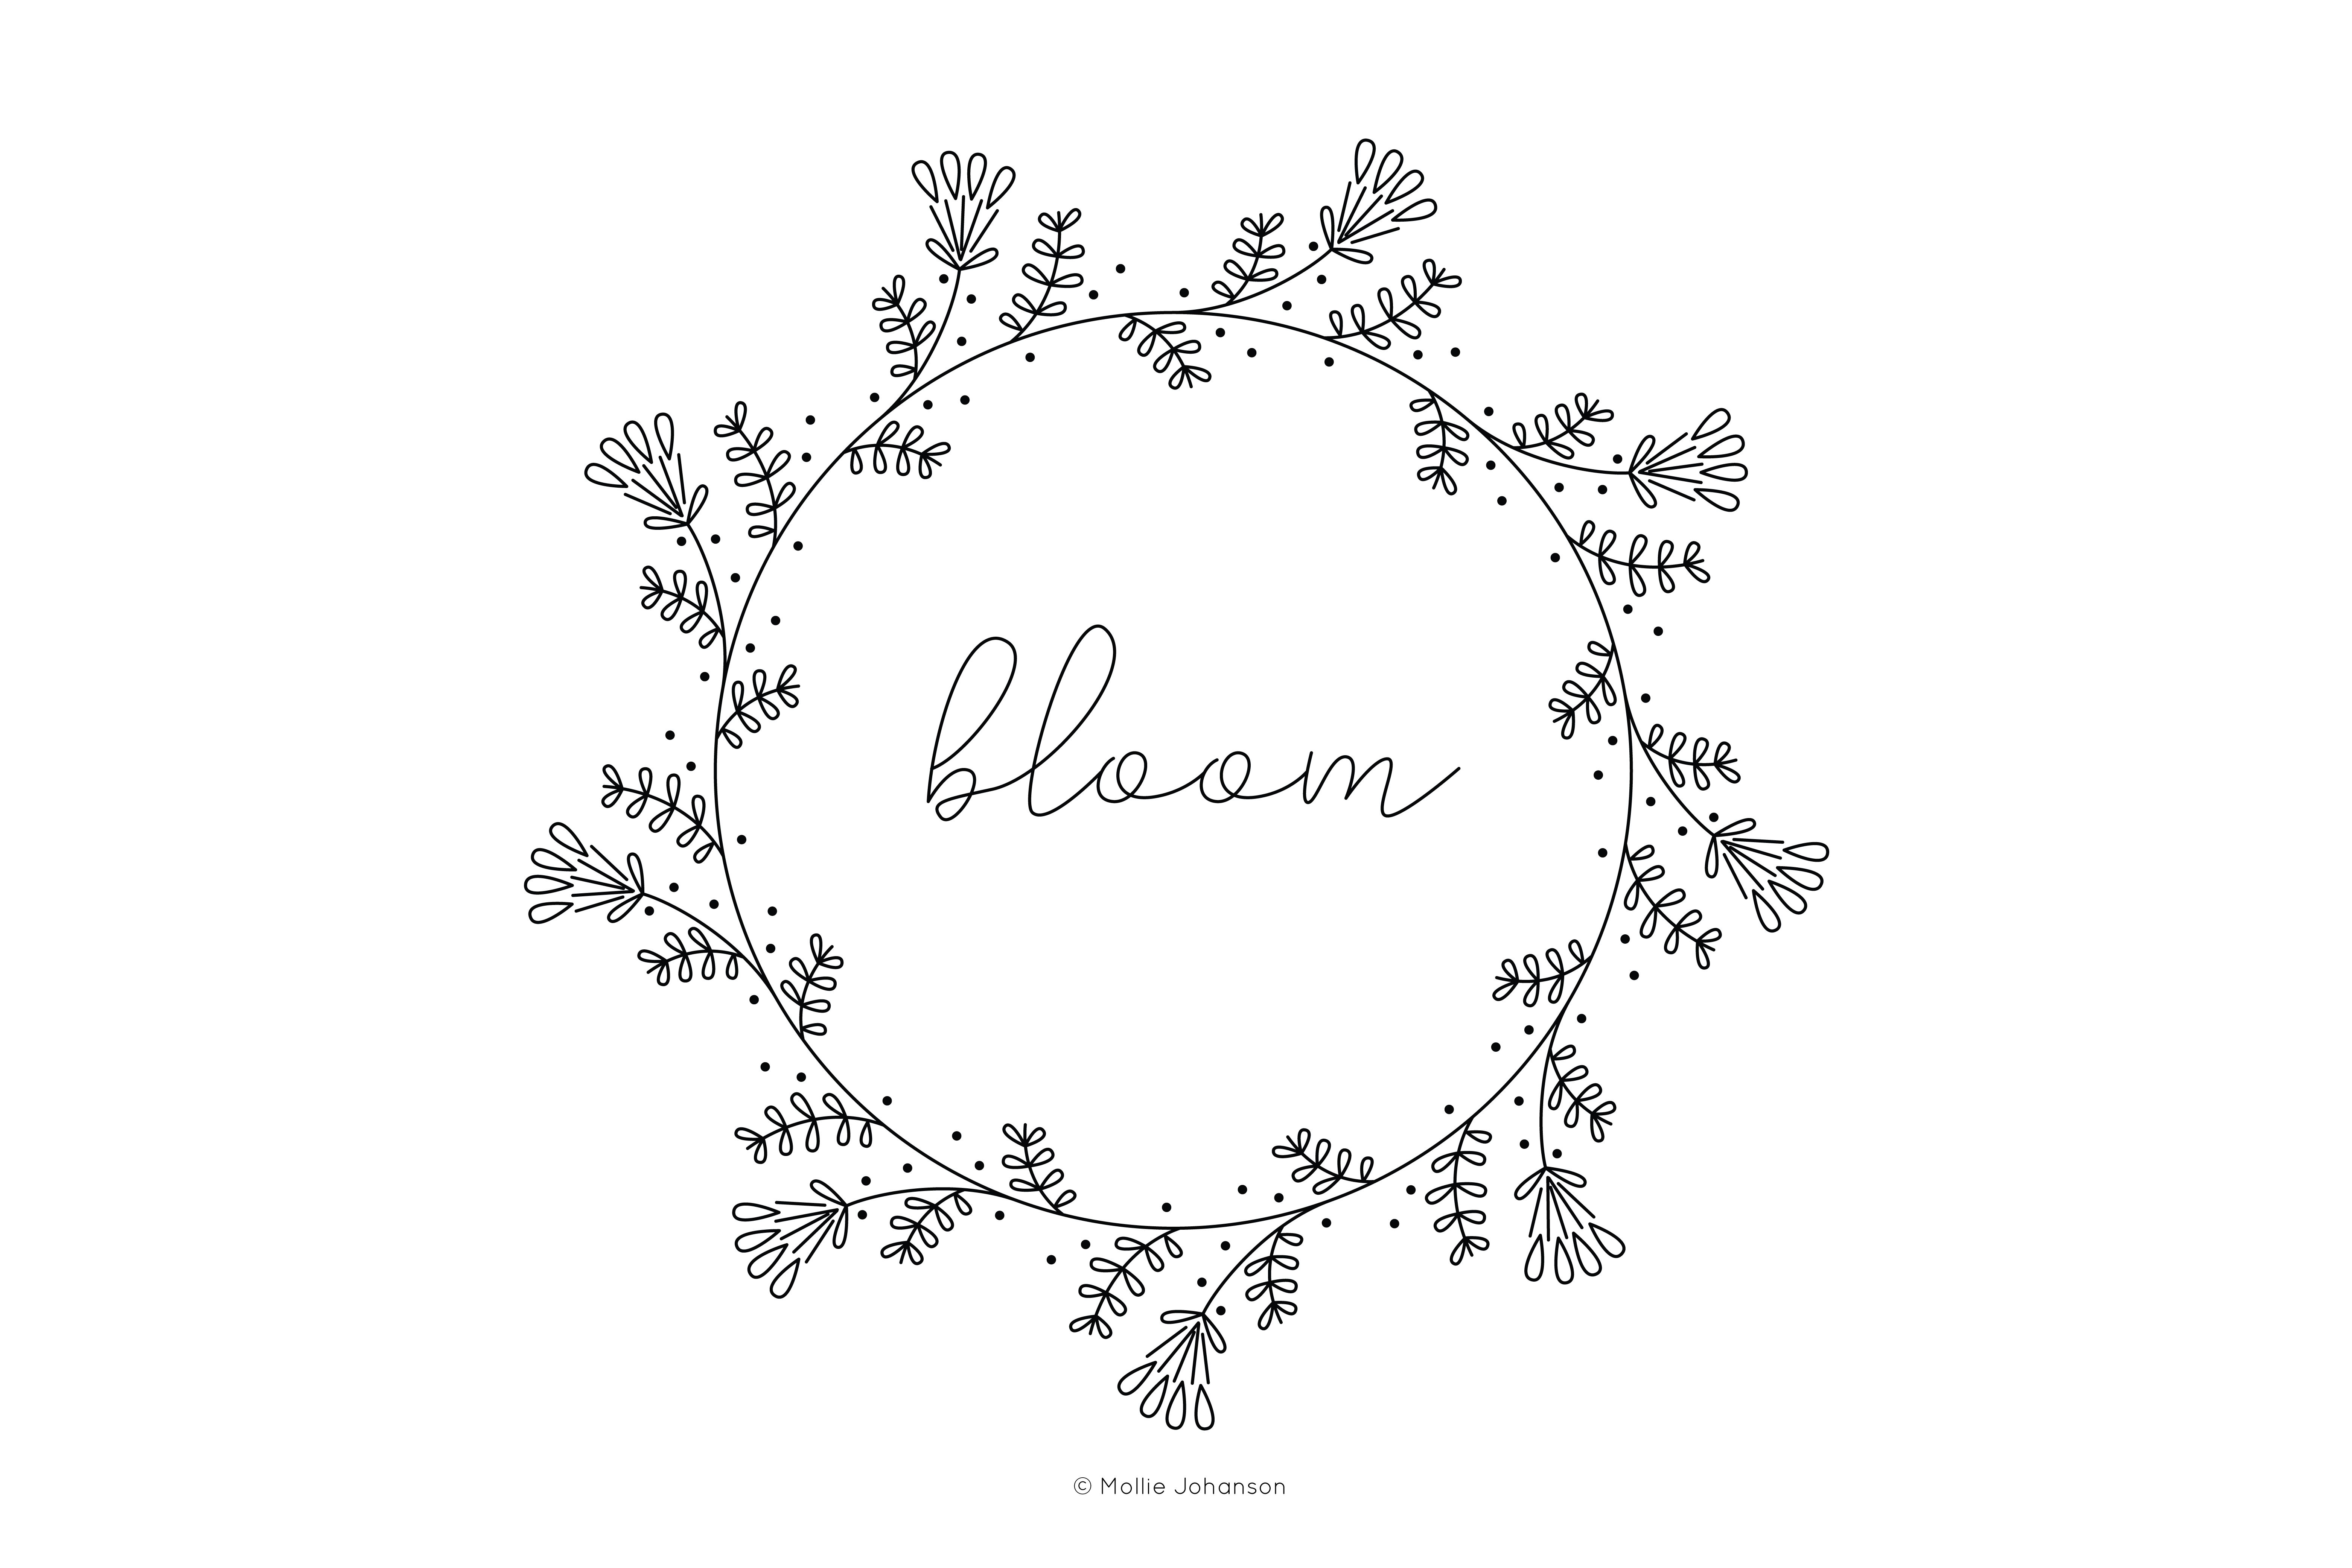 Embroidery Design Patterns Free Vintage Inspired Bloom Embroidery Pattern